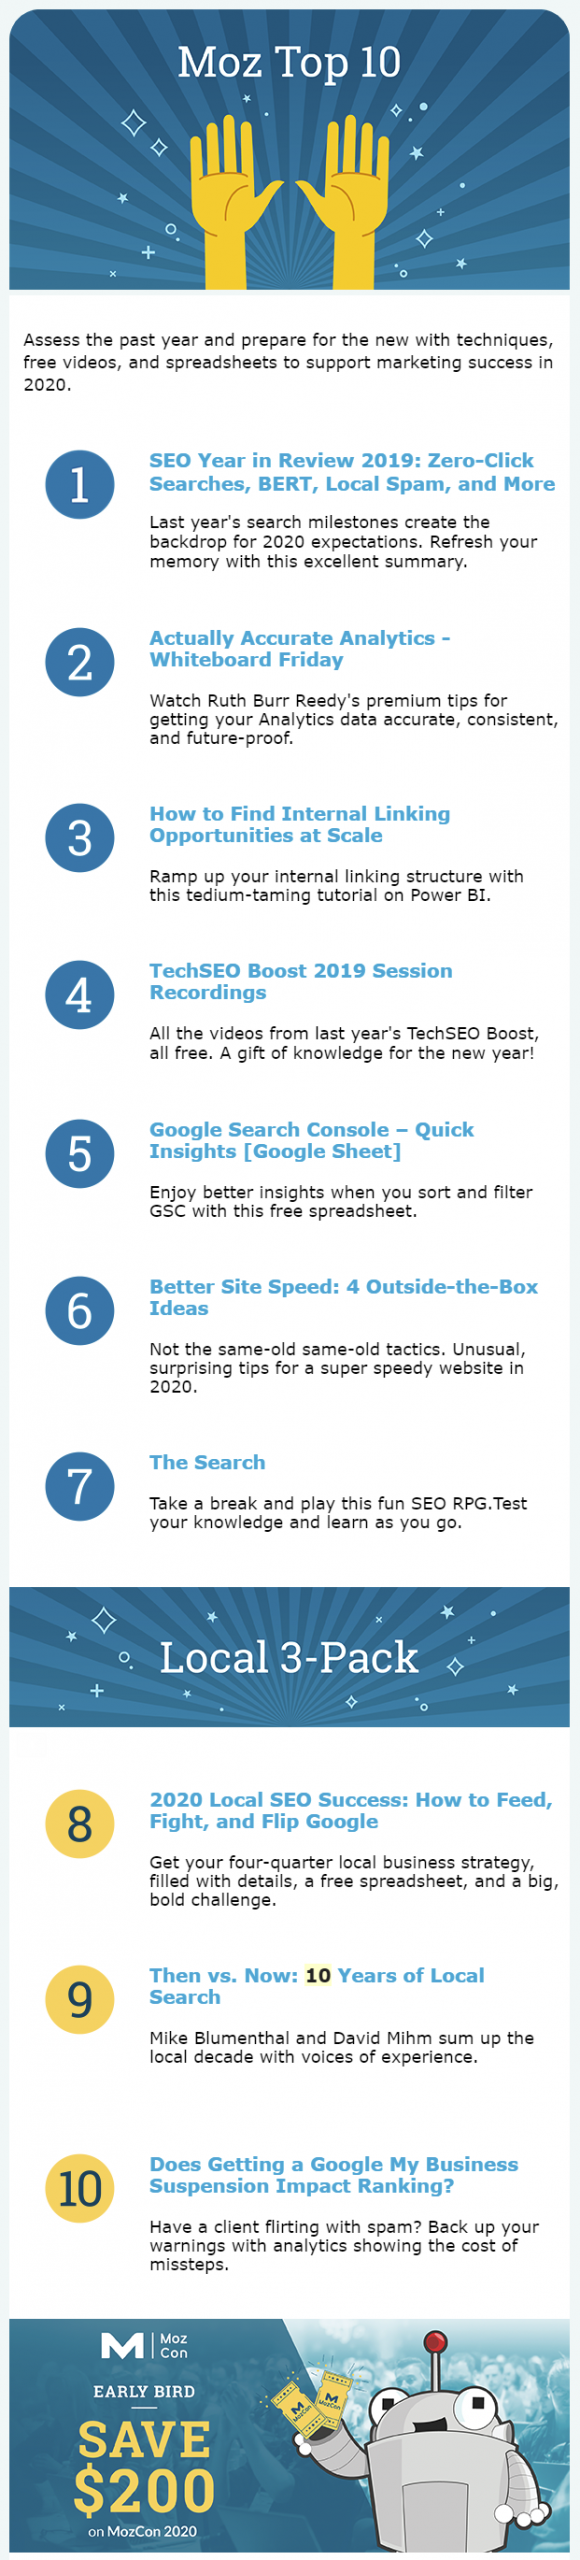 Moz Top 10 email newsletter